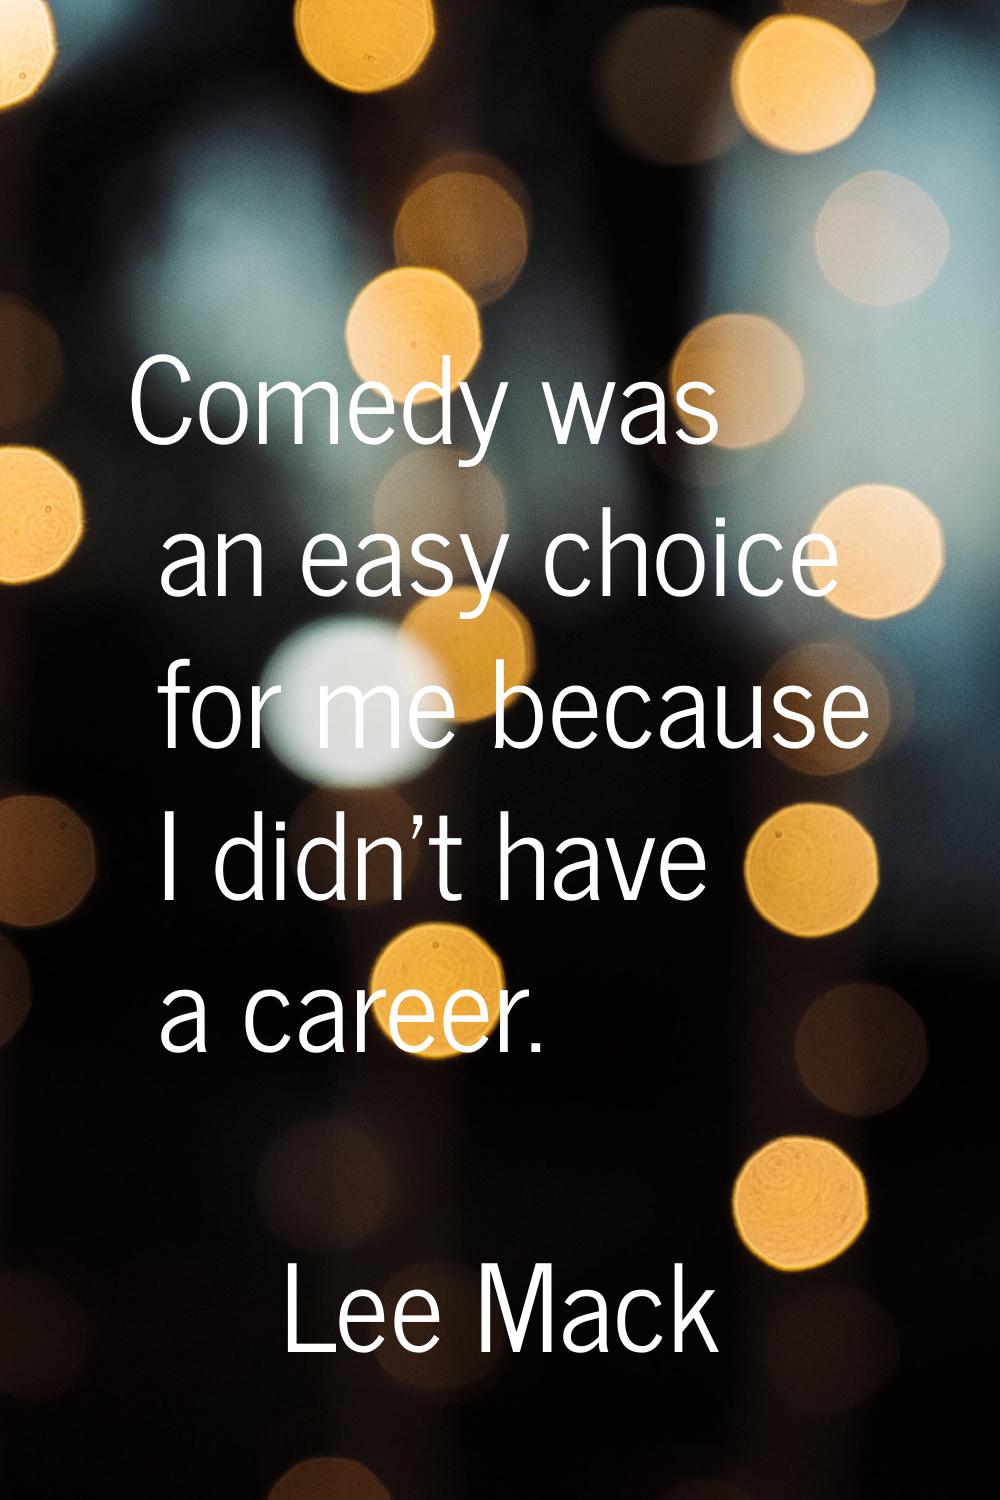 Comedy was an easy choice for me because I didn't have a career.